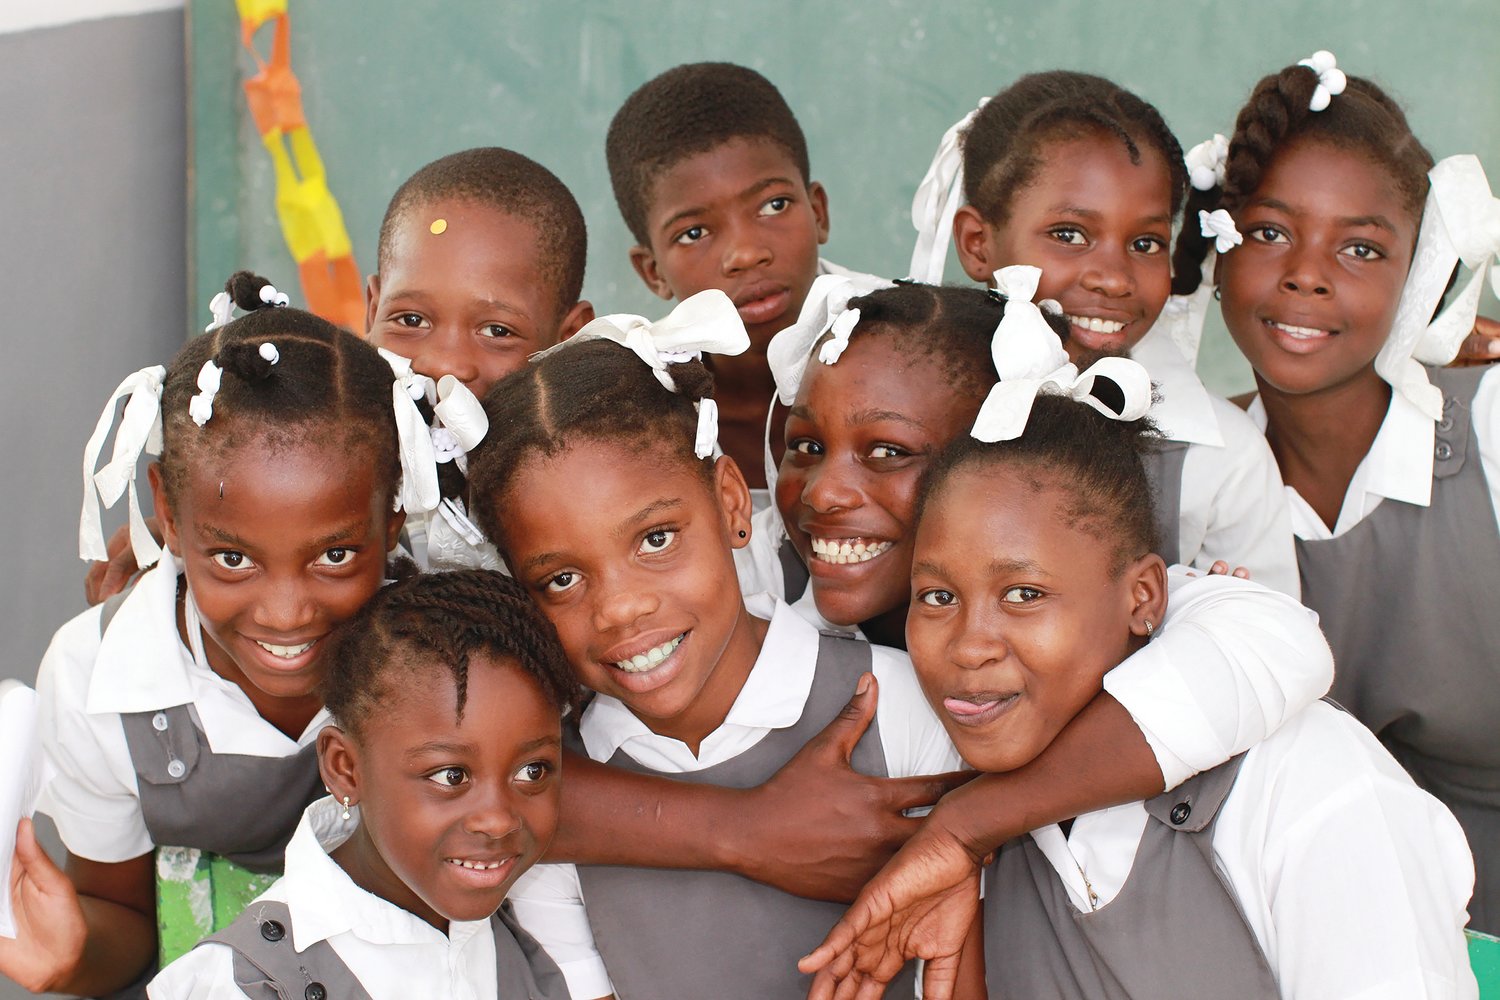 Students of the St. Dominique School in Marigot, Haiti, display their unity.